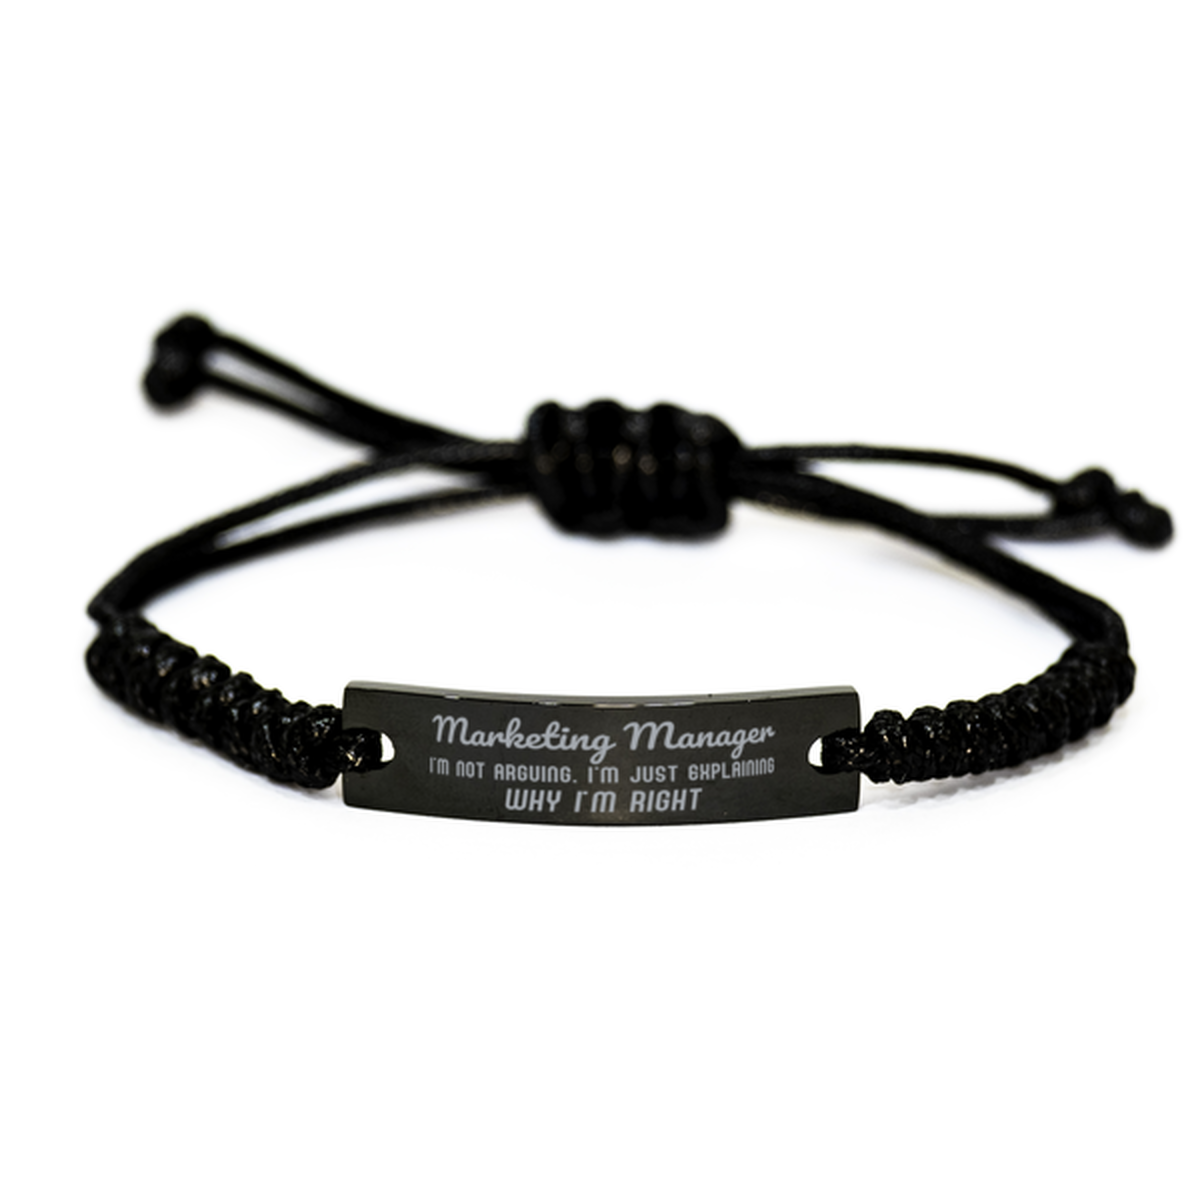 Marketing Manager I'm not Arguing. I'm Just Explaining Why I'm RIGHT Black Rope Bracelet, Funny Saying Quote Marketing Manager Gifts For Marketing Manager Graduation Birthday Christmas Gifts for Men Women Coworker